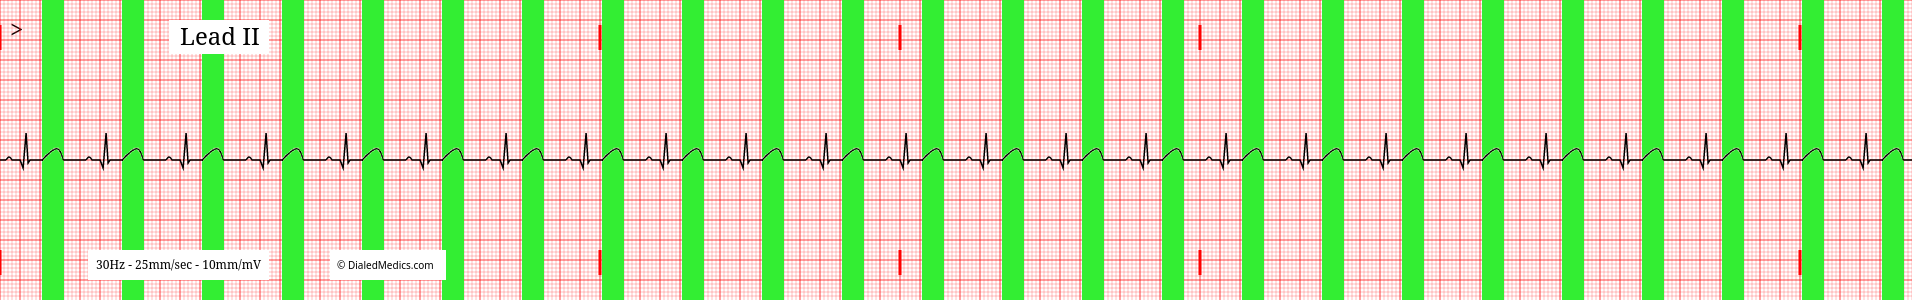 ECG tracing of a normal sinus rhythm with T Waves marked.